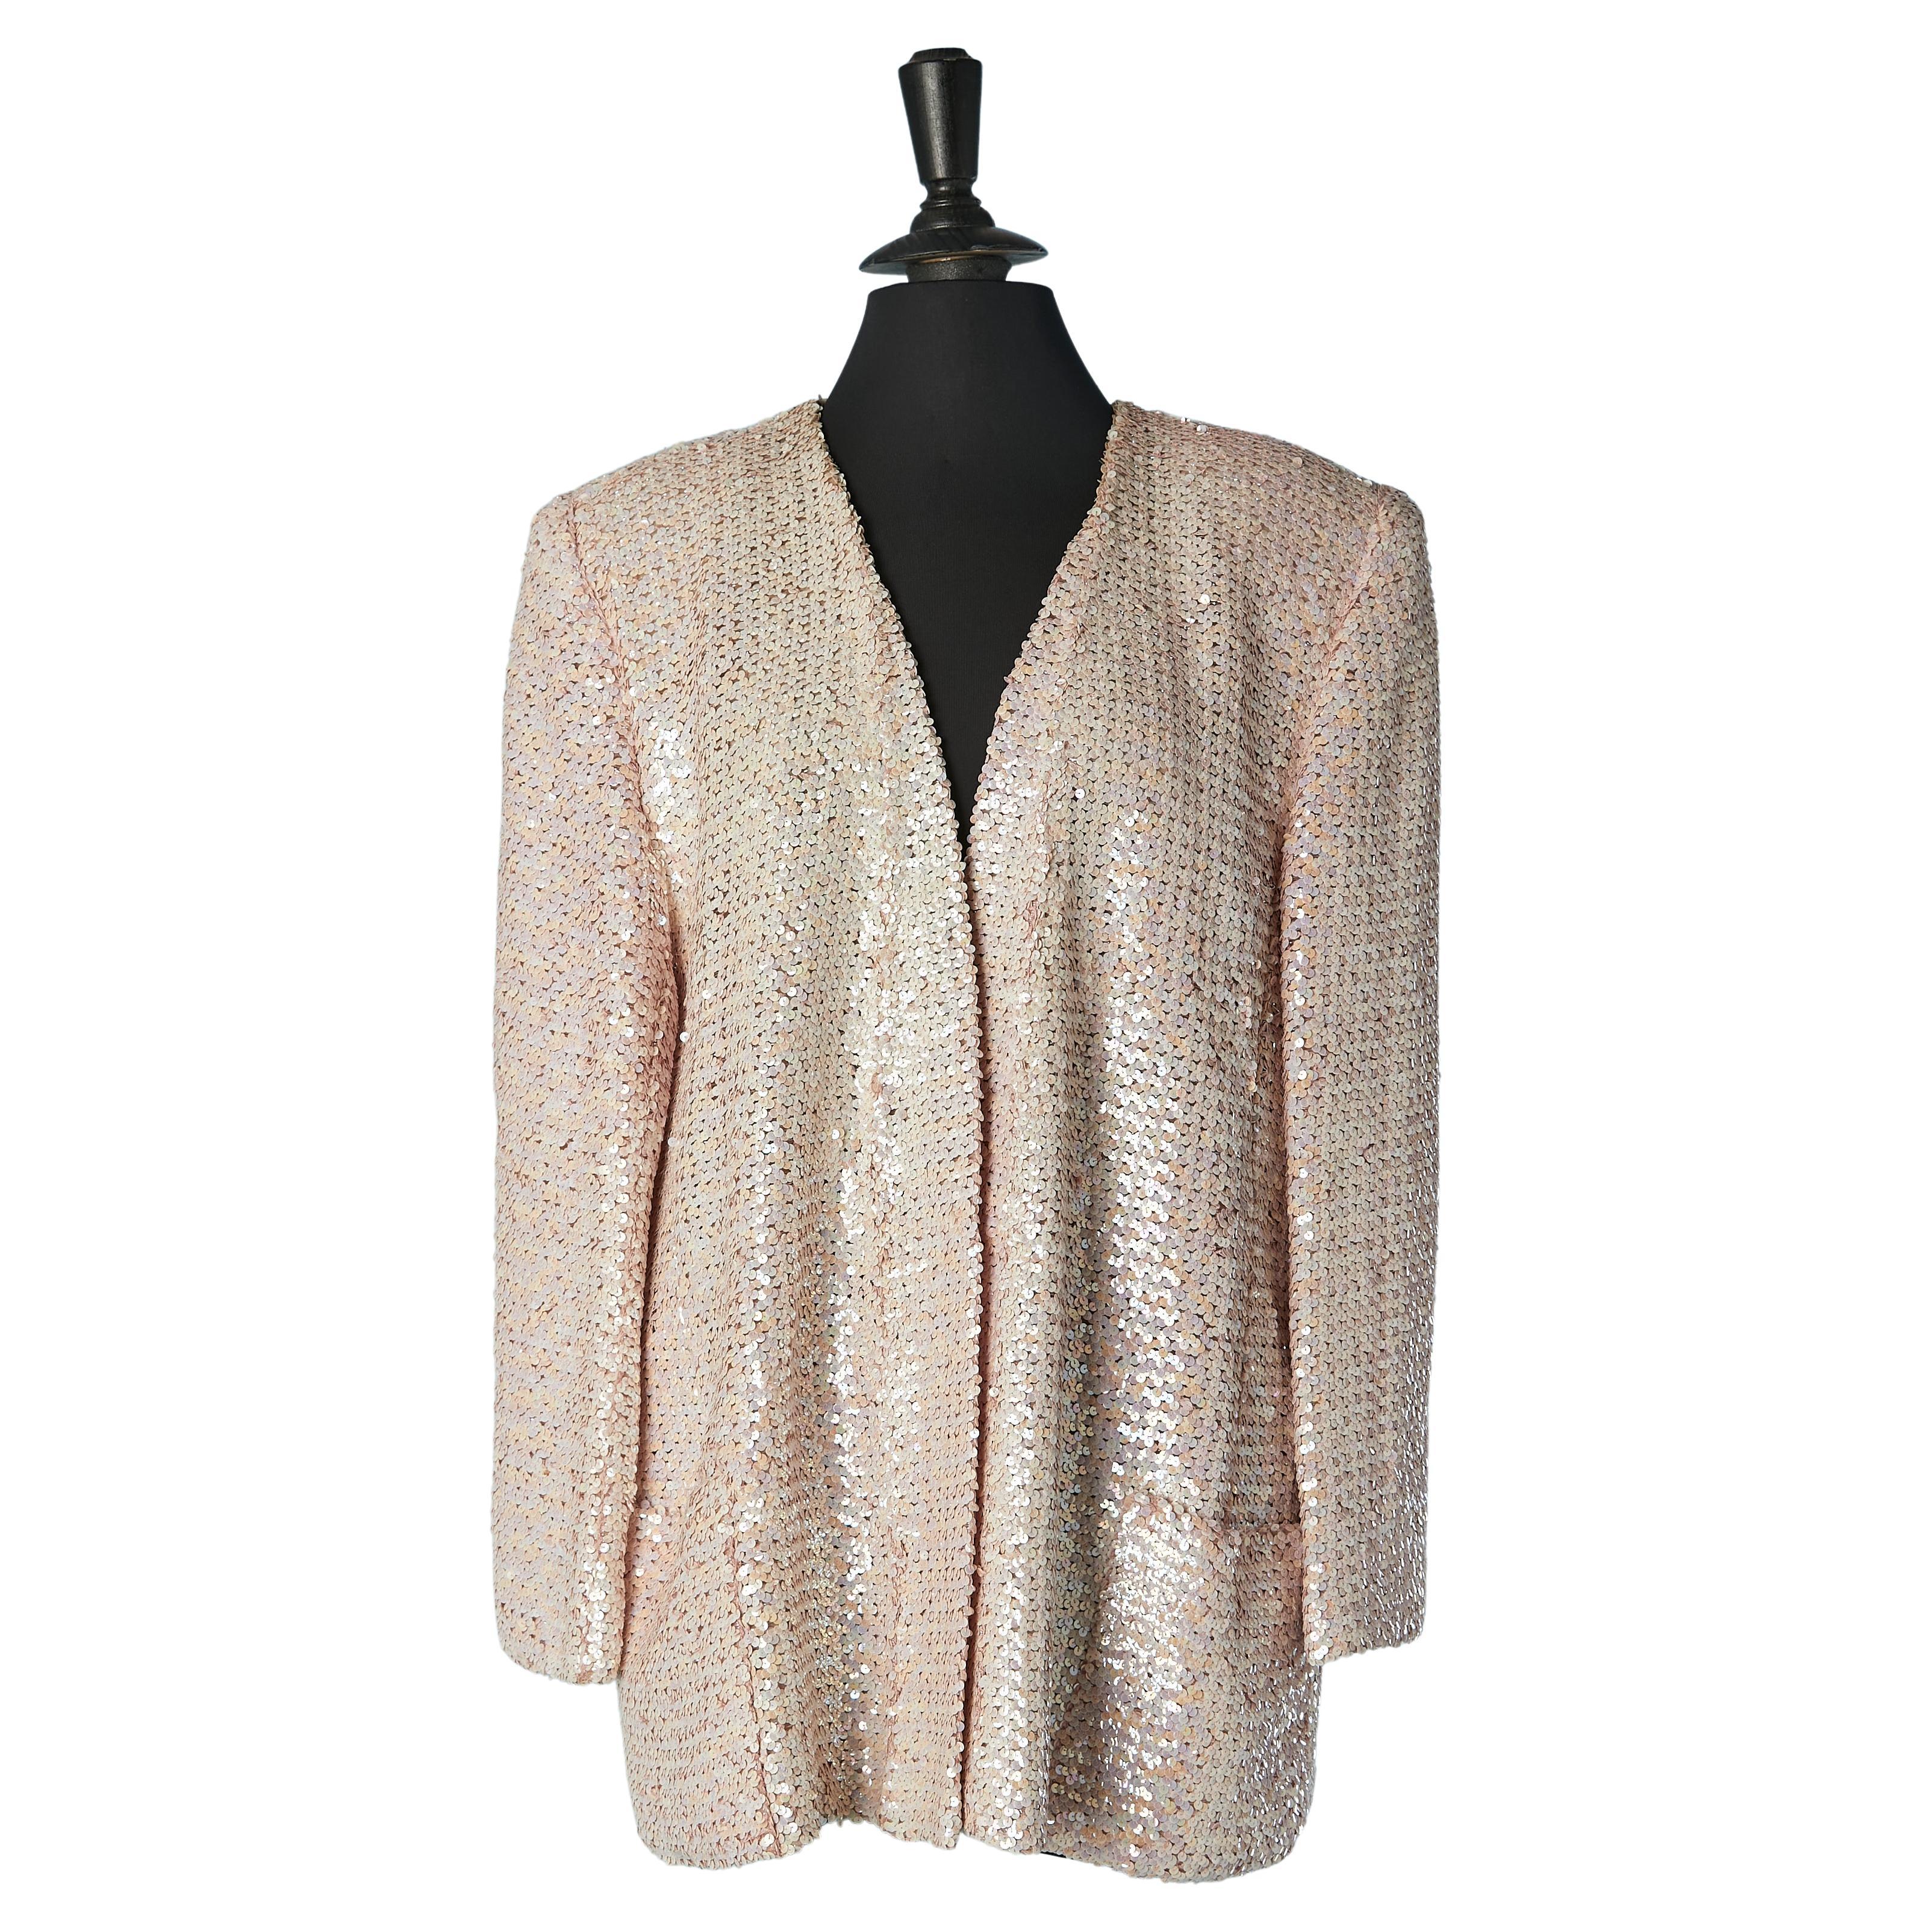  Edge to edge jacket in pale pink sequins Nina Ricci Circa 1980's  For Sale